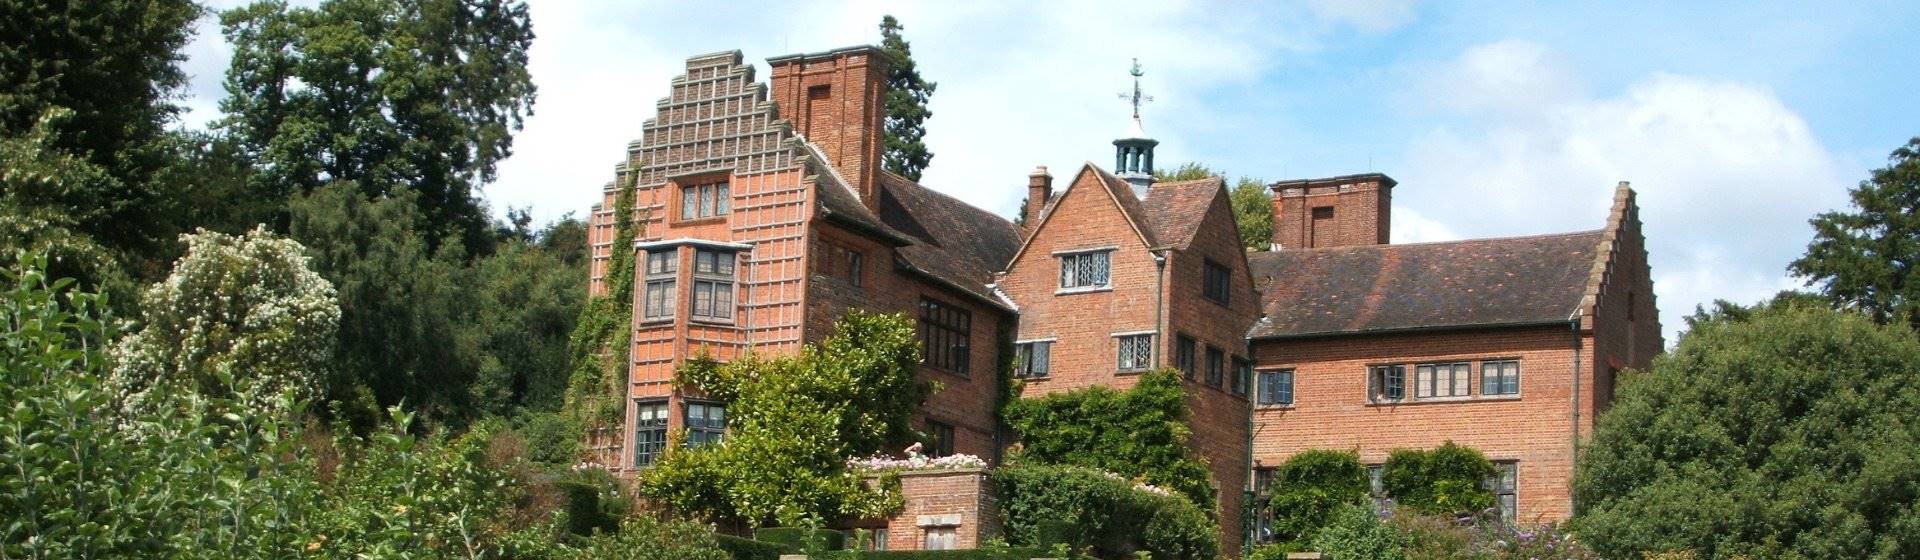 Chartwell House, home of Sir Winston Churchill